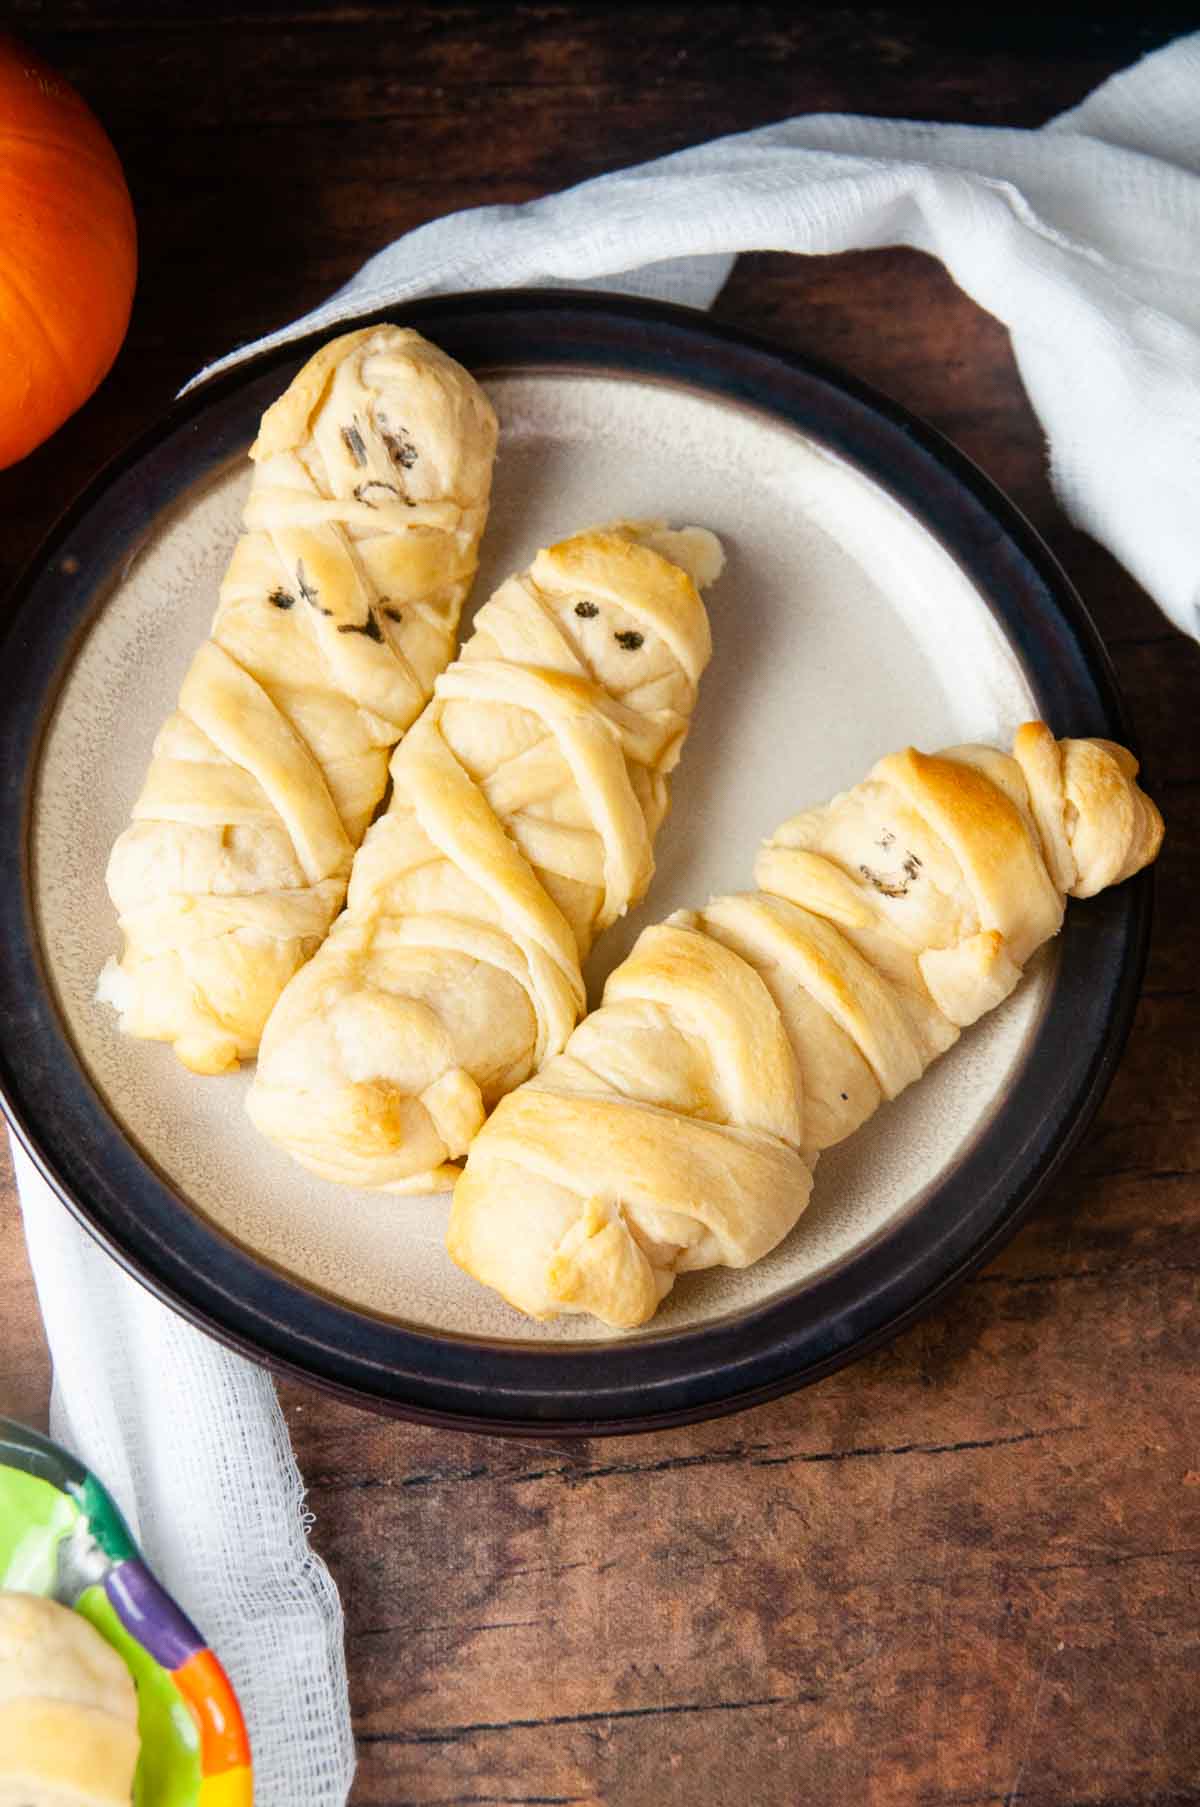 Mummy mozzarella sticks in crescent dough are an easy Halloween snack or appetizer both kids and adults love.